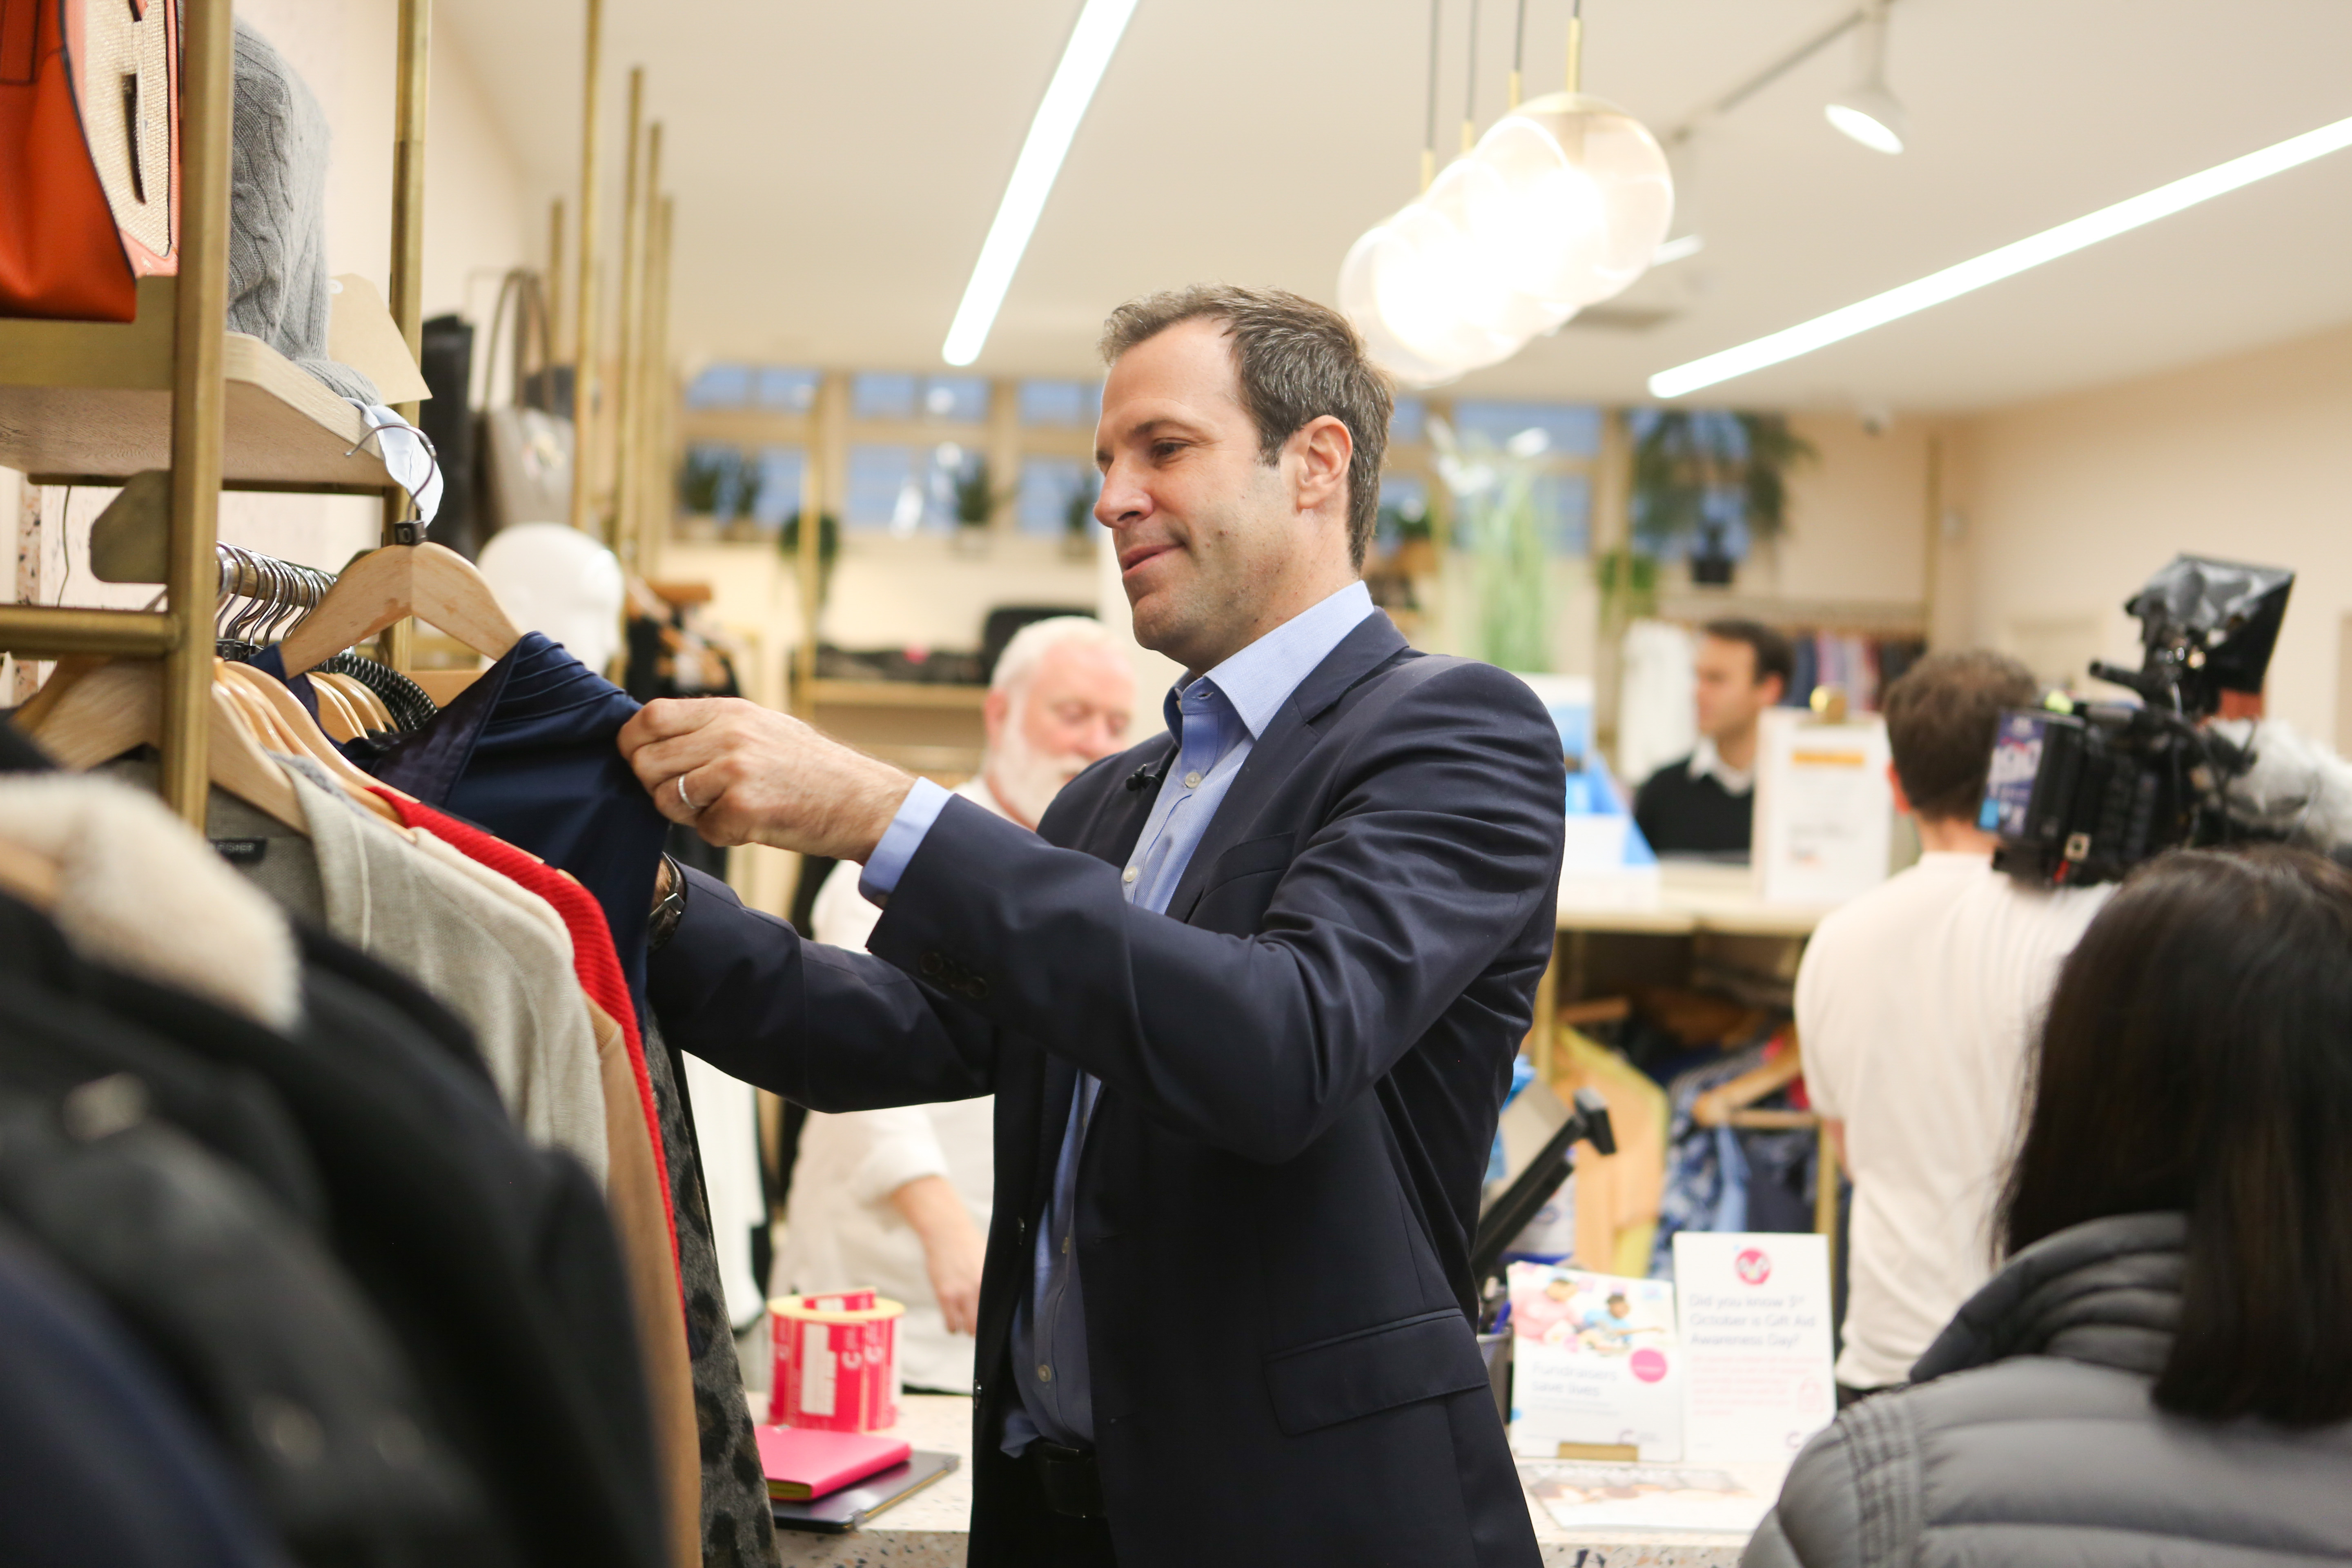 Greg Rusedski helped out at a Cancer Research UK shop to launch the charity's partnership with the Nitto ATP Finals